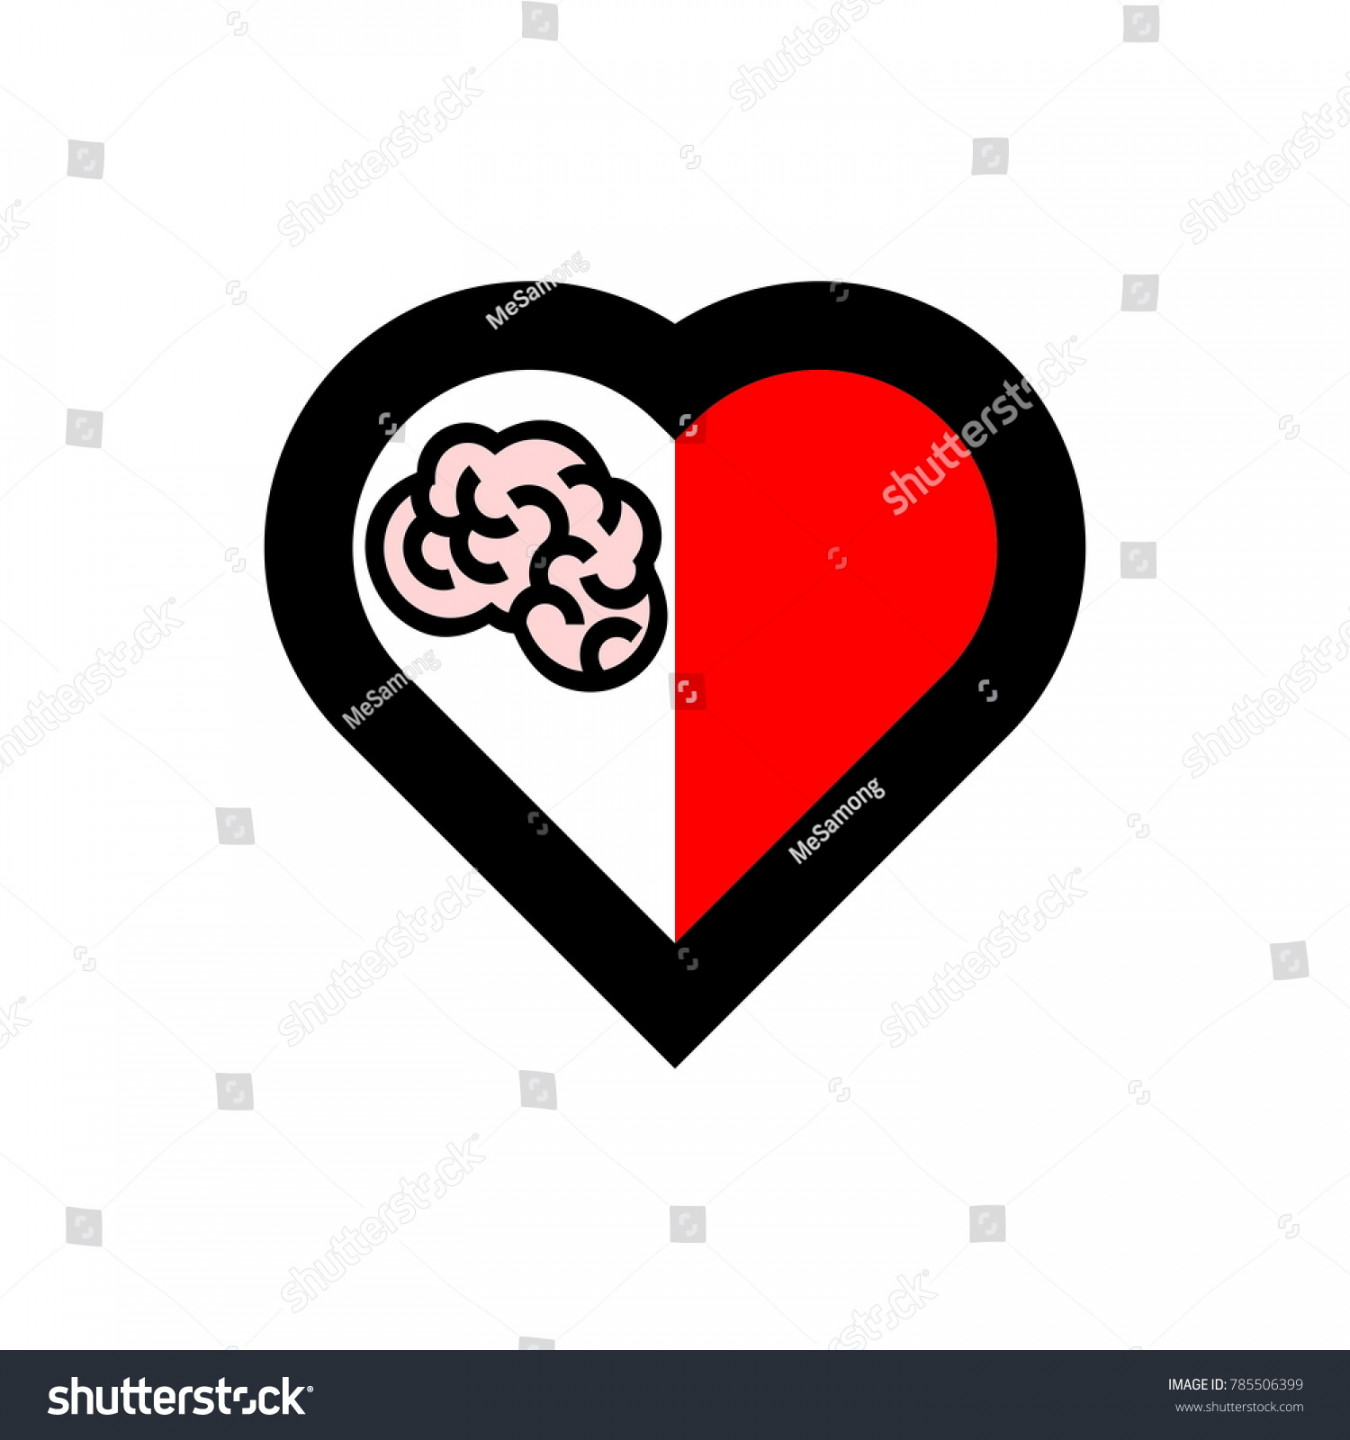 Brain Inside Heart Easy Simply Drawing Stock Vector (Royalty Free